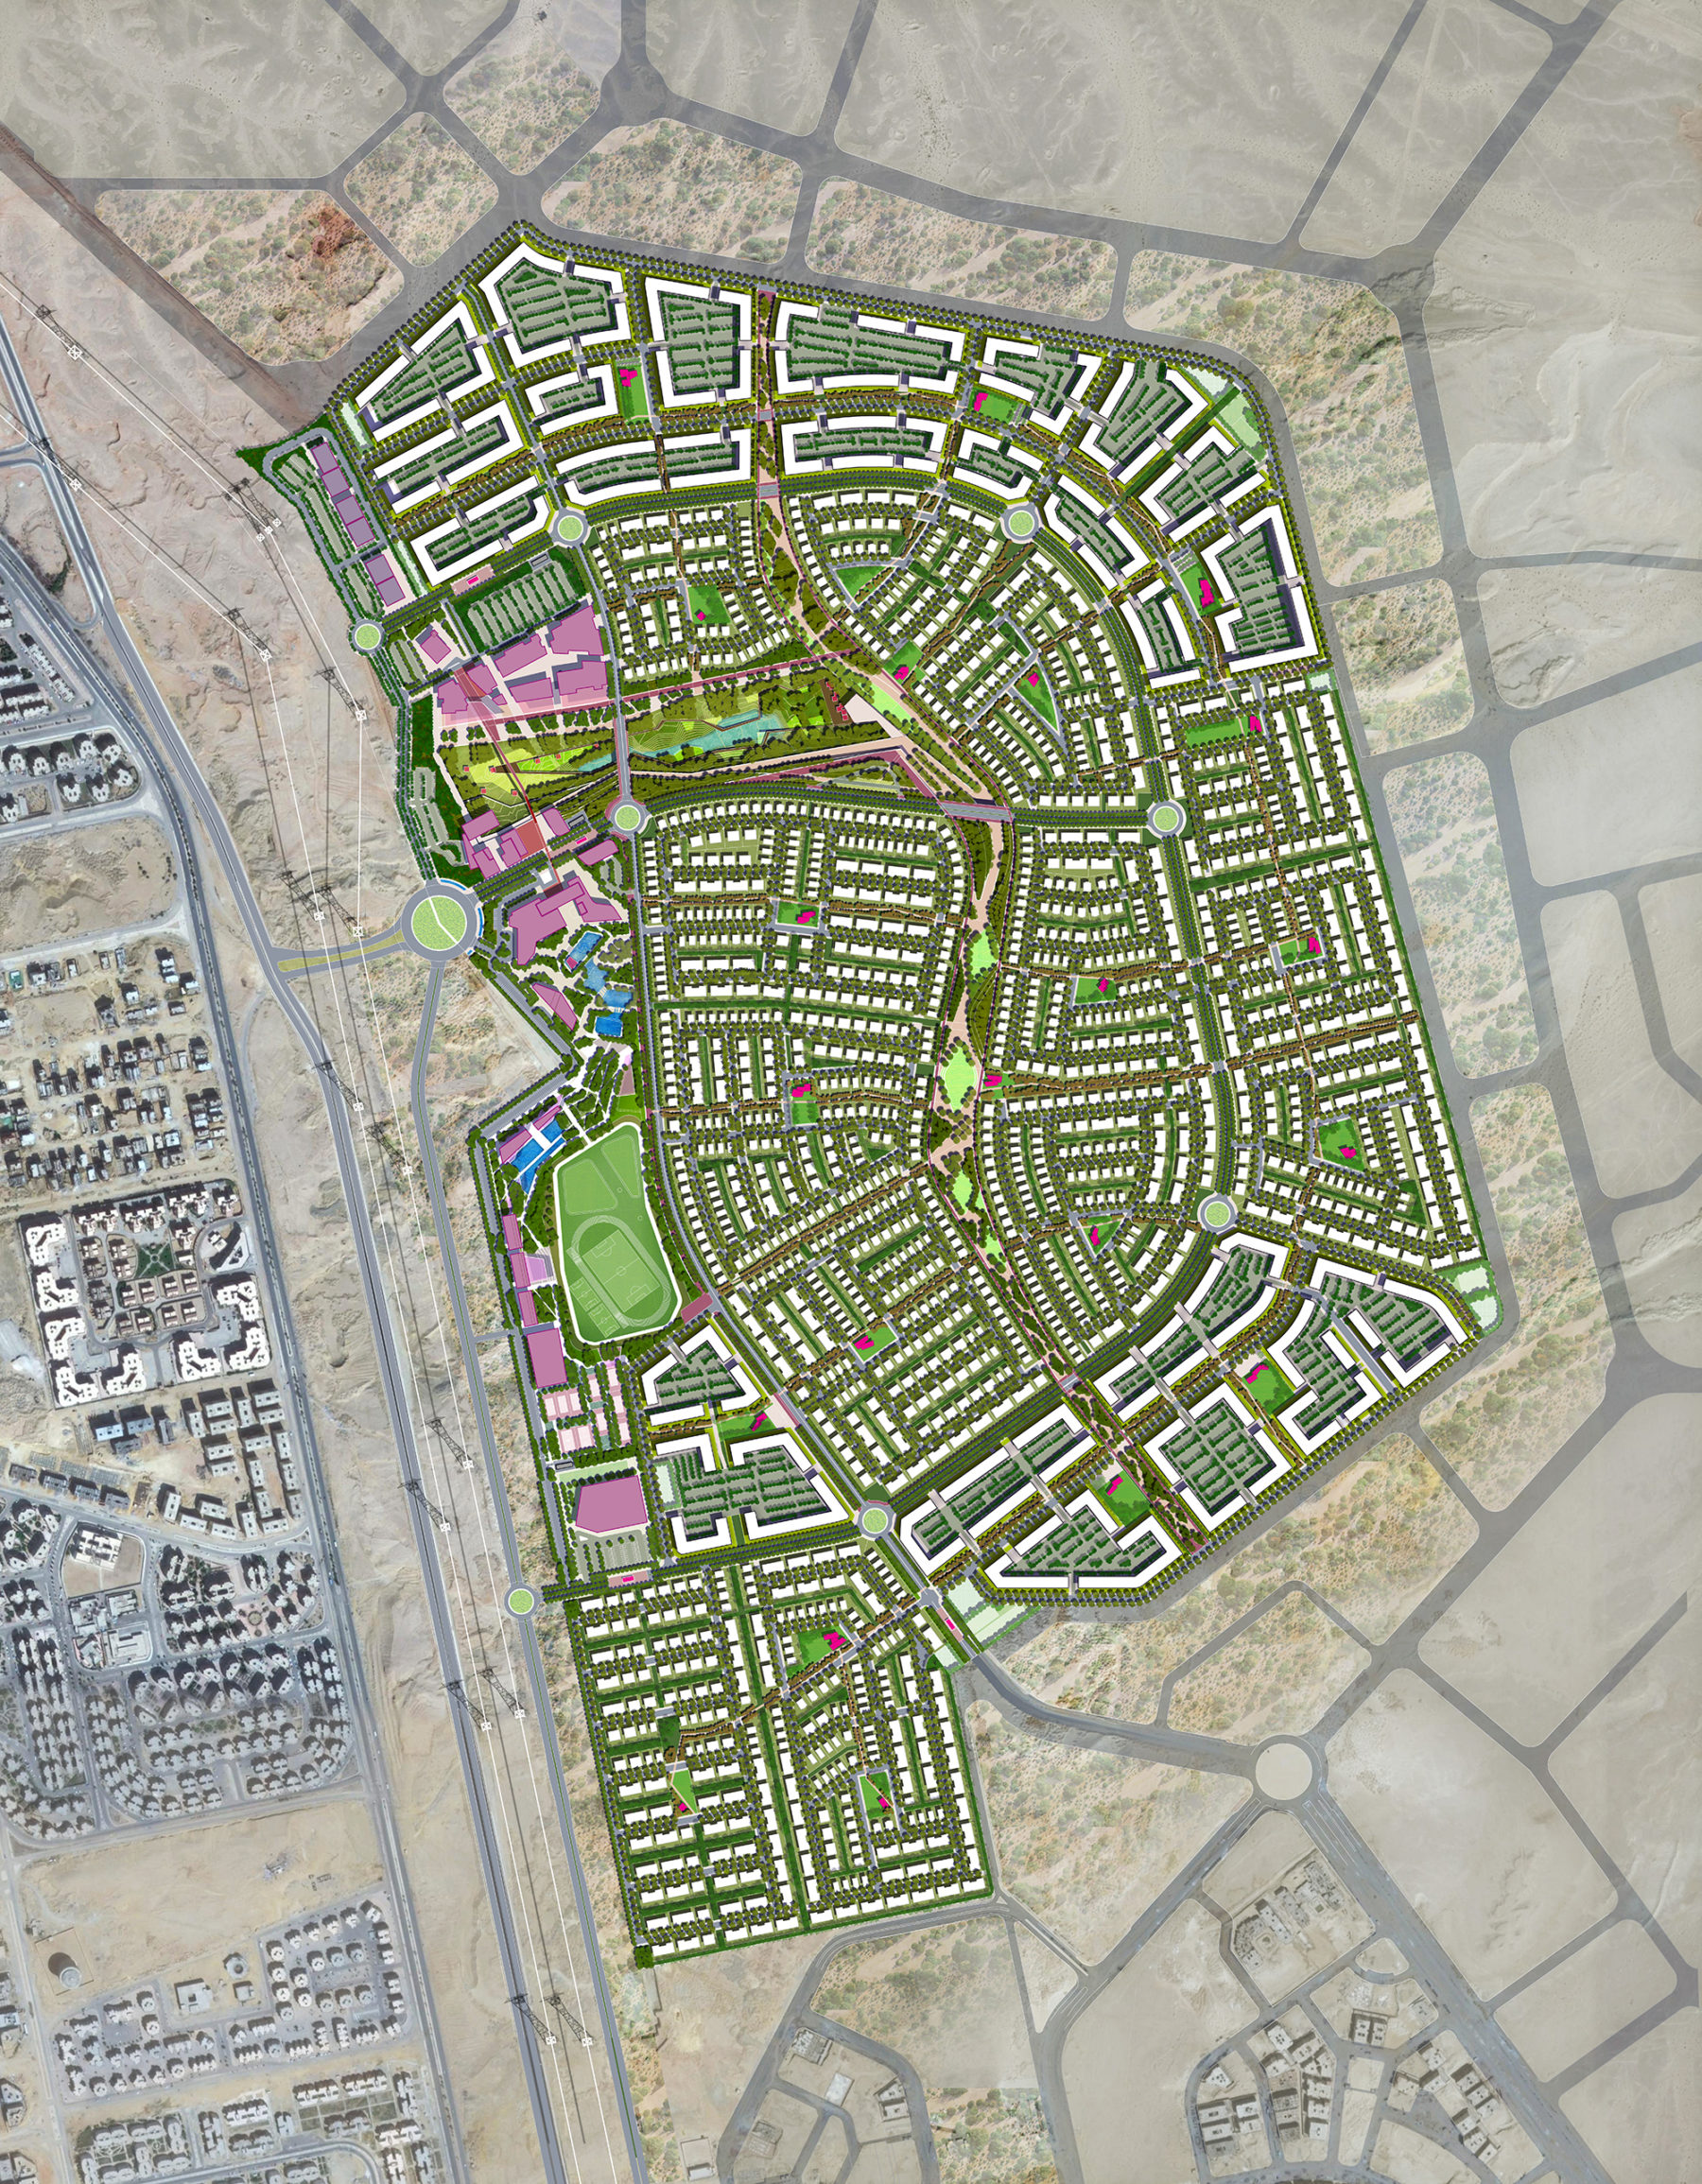 top-down plan view of site area